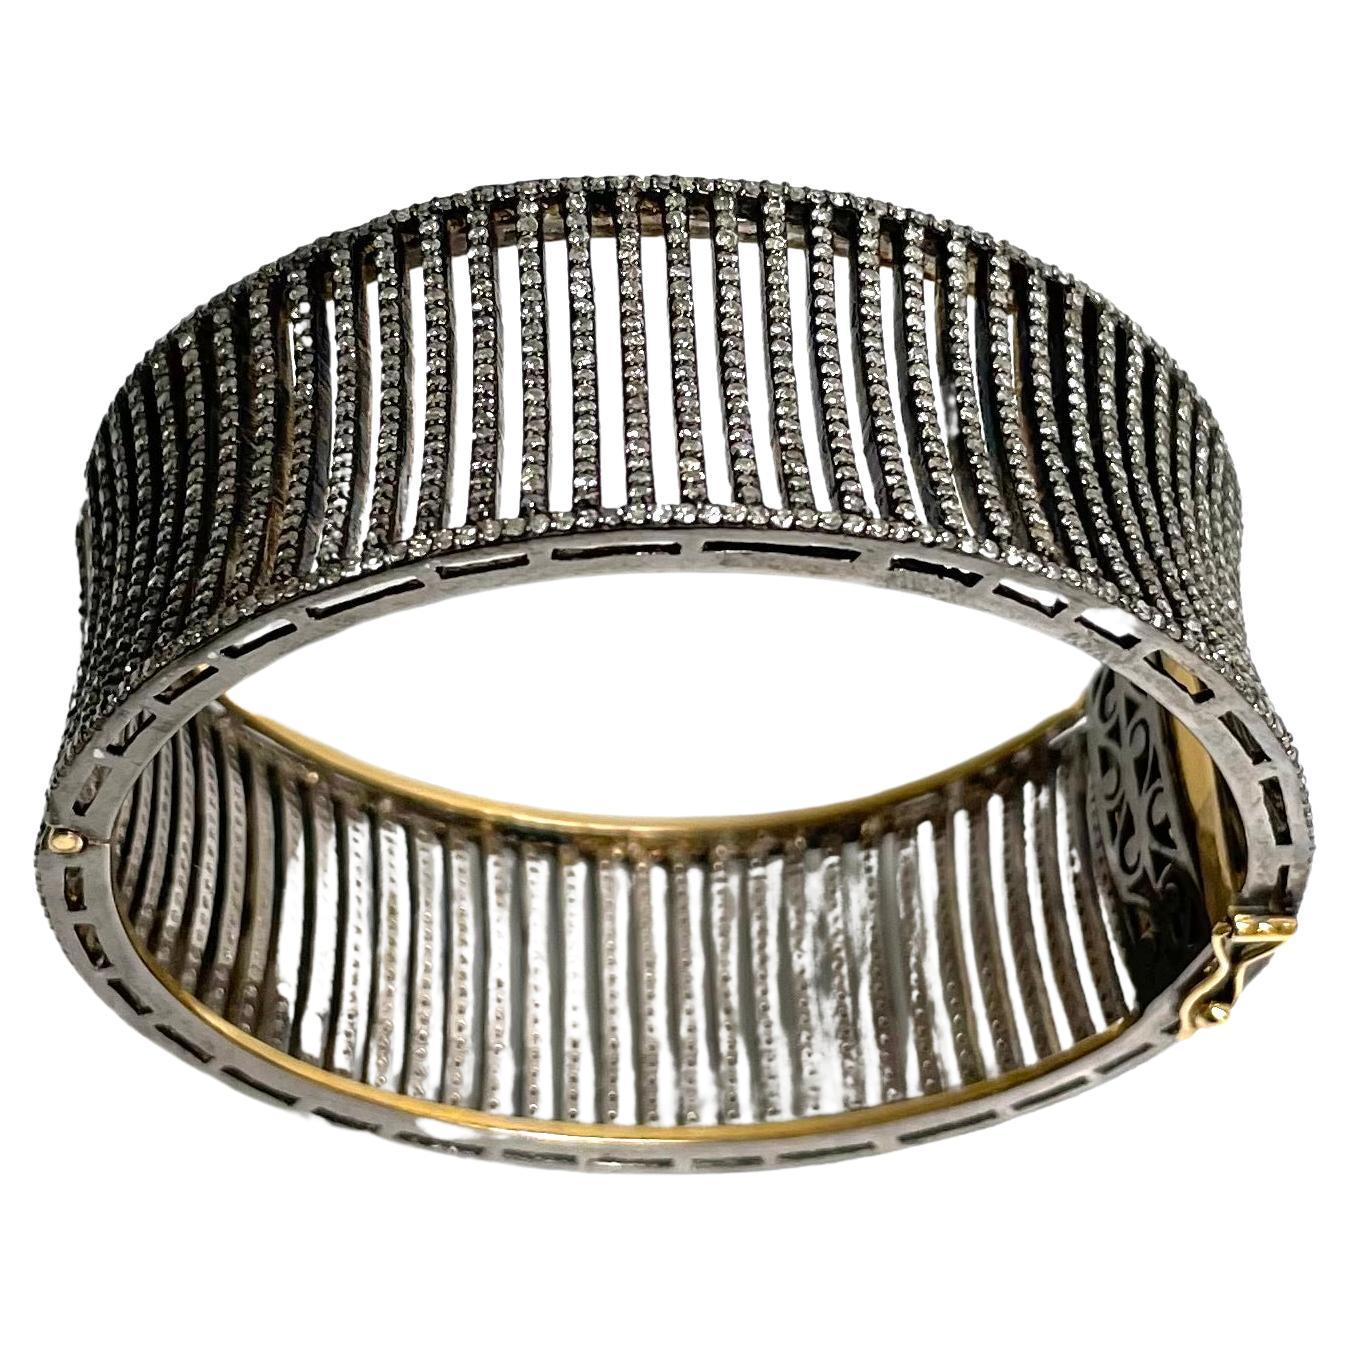 Description 
This statement diamond cuff bracelet boasts an edgy and sophisticated style perfect for any fashion icon who wants to make heads turn twice. The beautiful pave diamond concave bars gives this stunning bracelet its rightful place as the